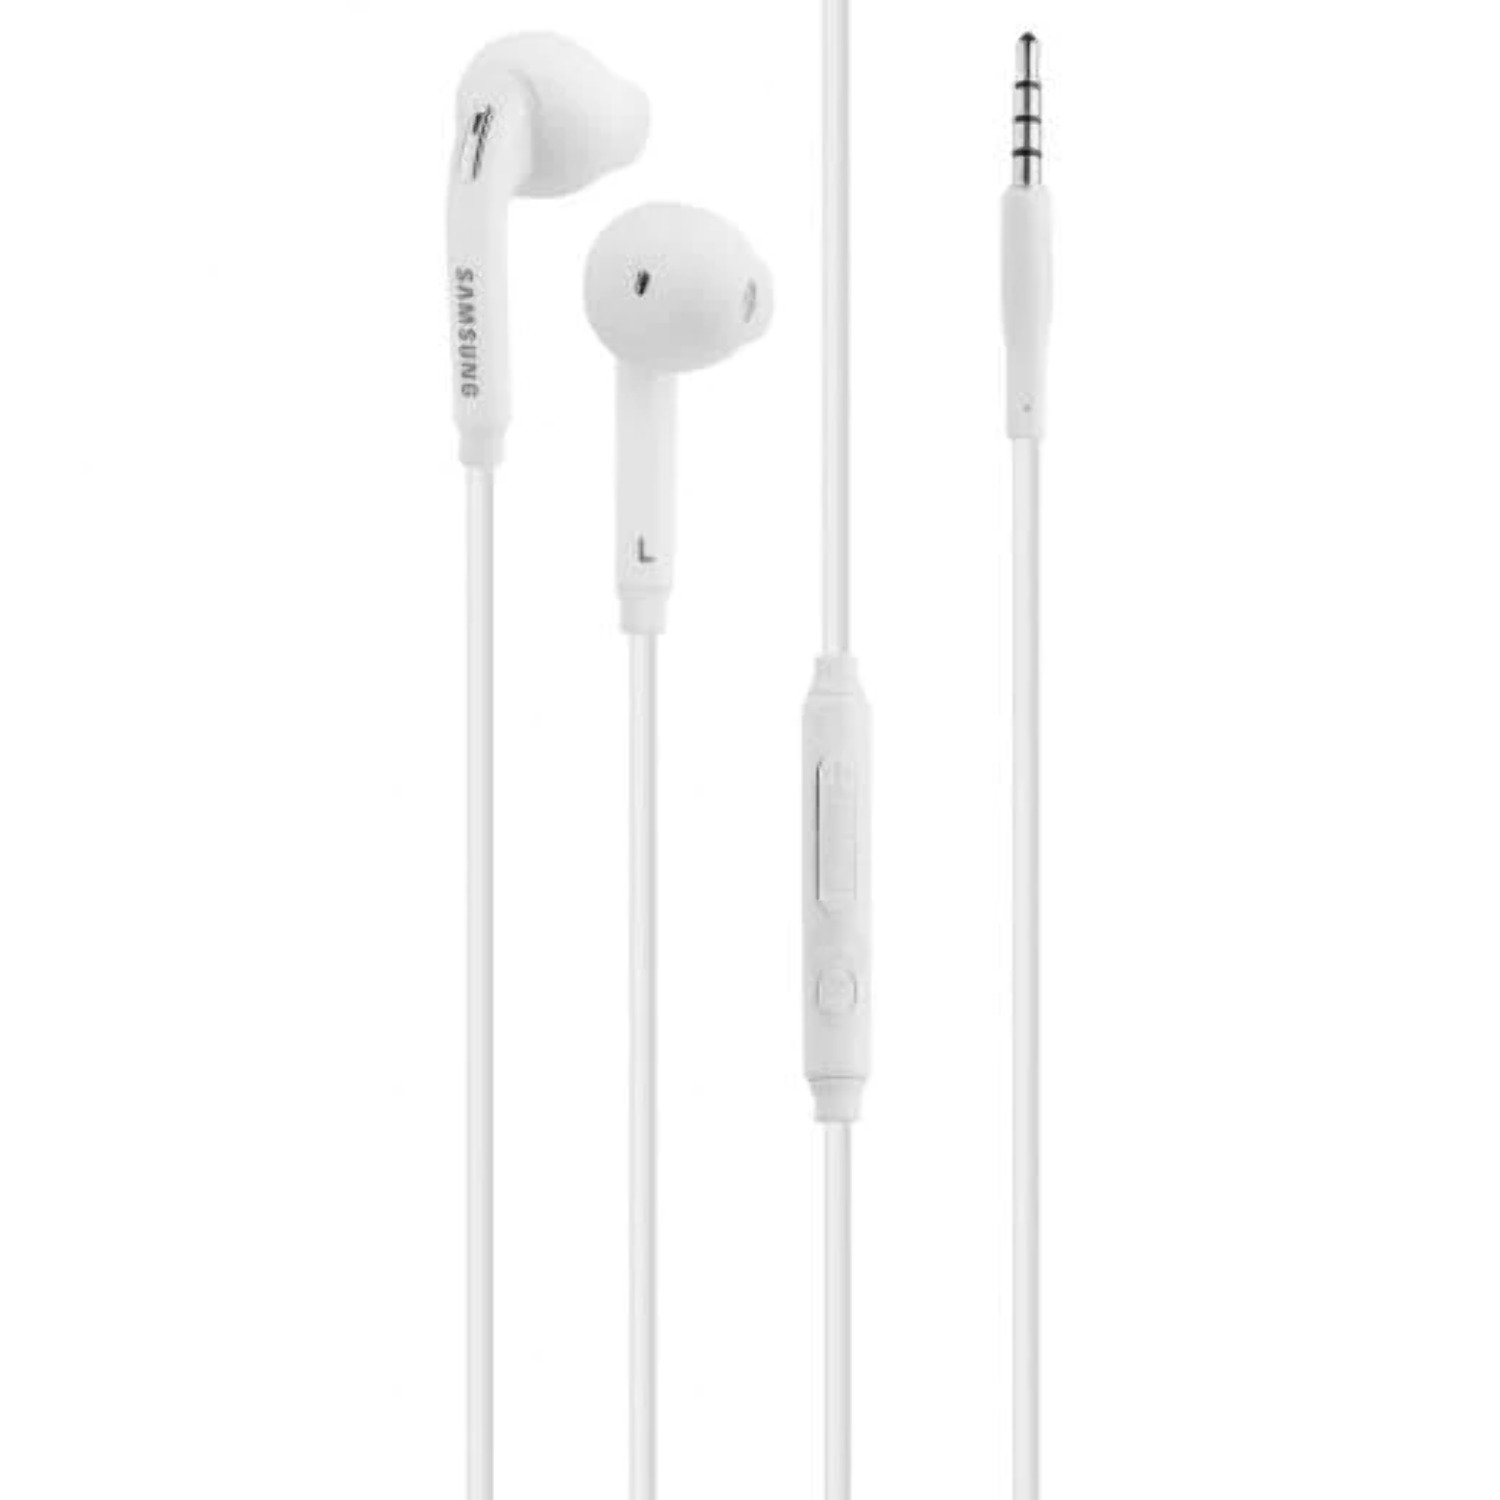 Premium Wired Headset 3.5mm Earbud Stereo In-Ear Headphones with in-line Remote & Microphone Compatible with Nokia Lumia 930 - image 1 of 1